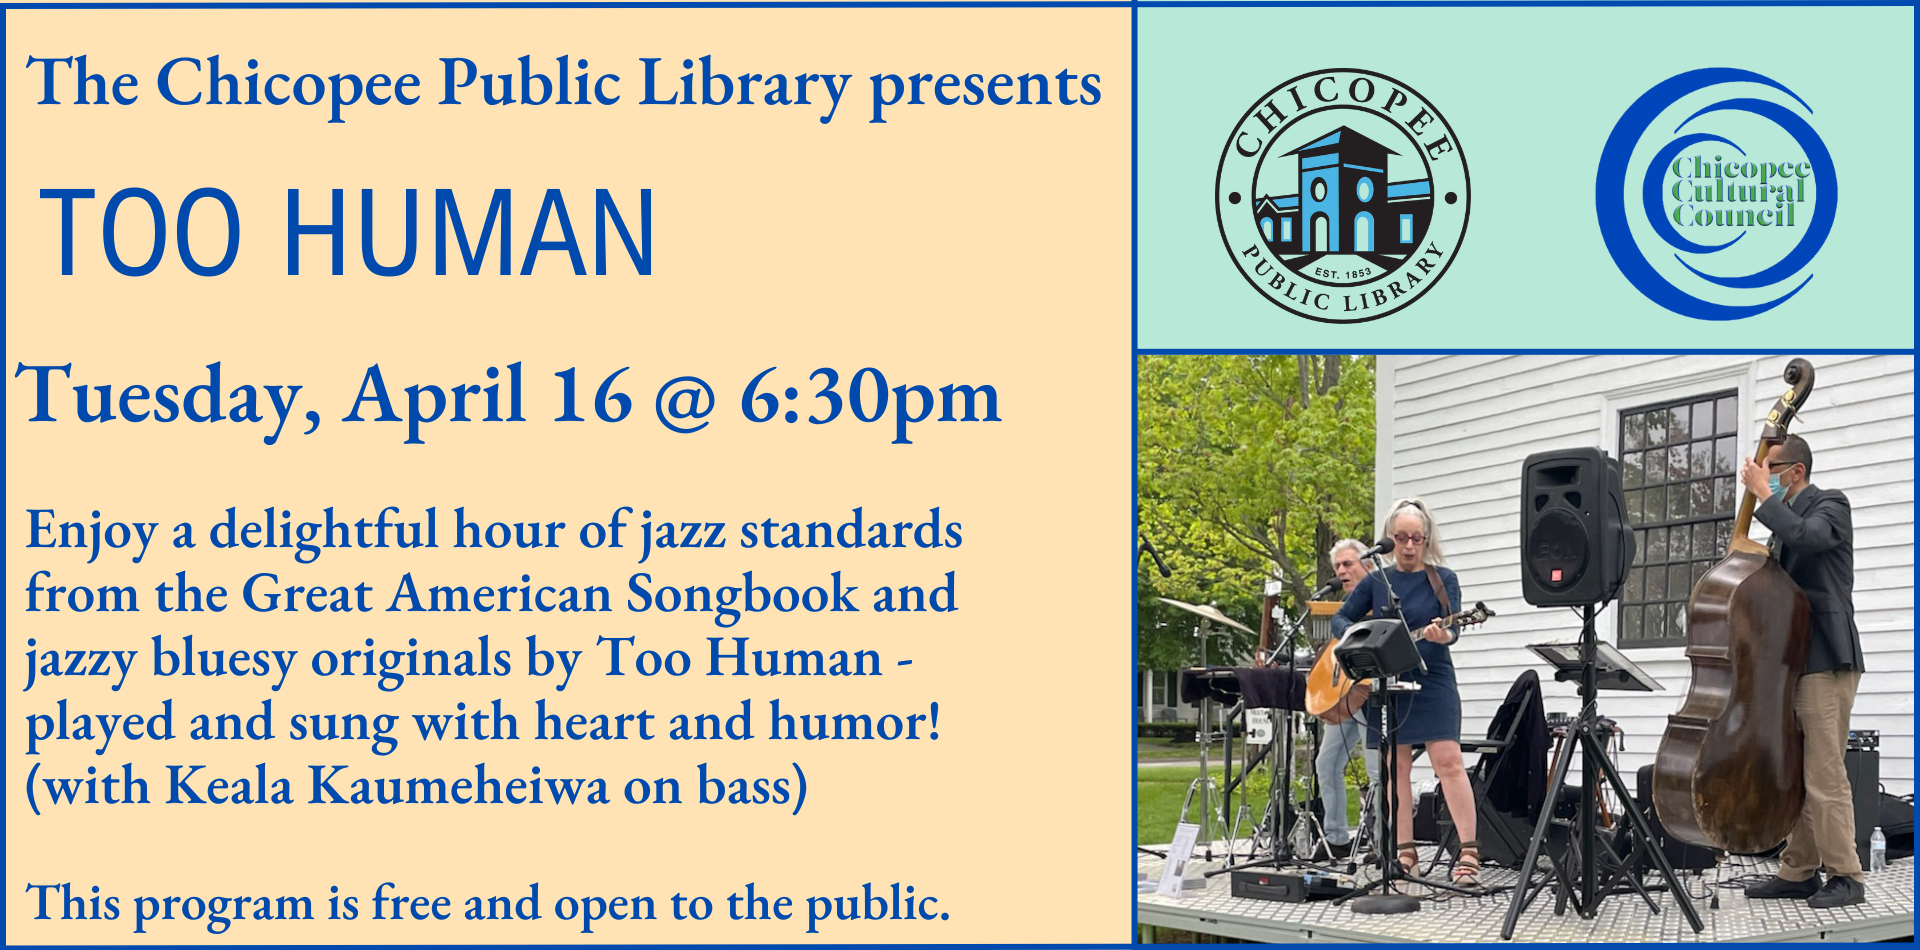 The trio Too Human will play jazz music at the Chicopee Library on April 16 at 6;30pm